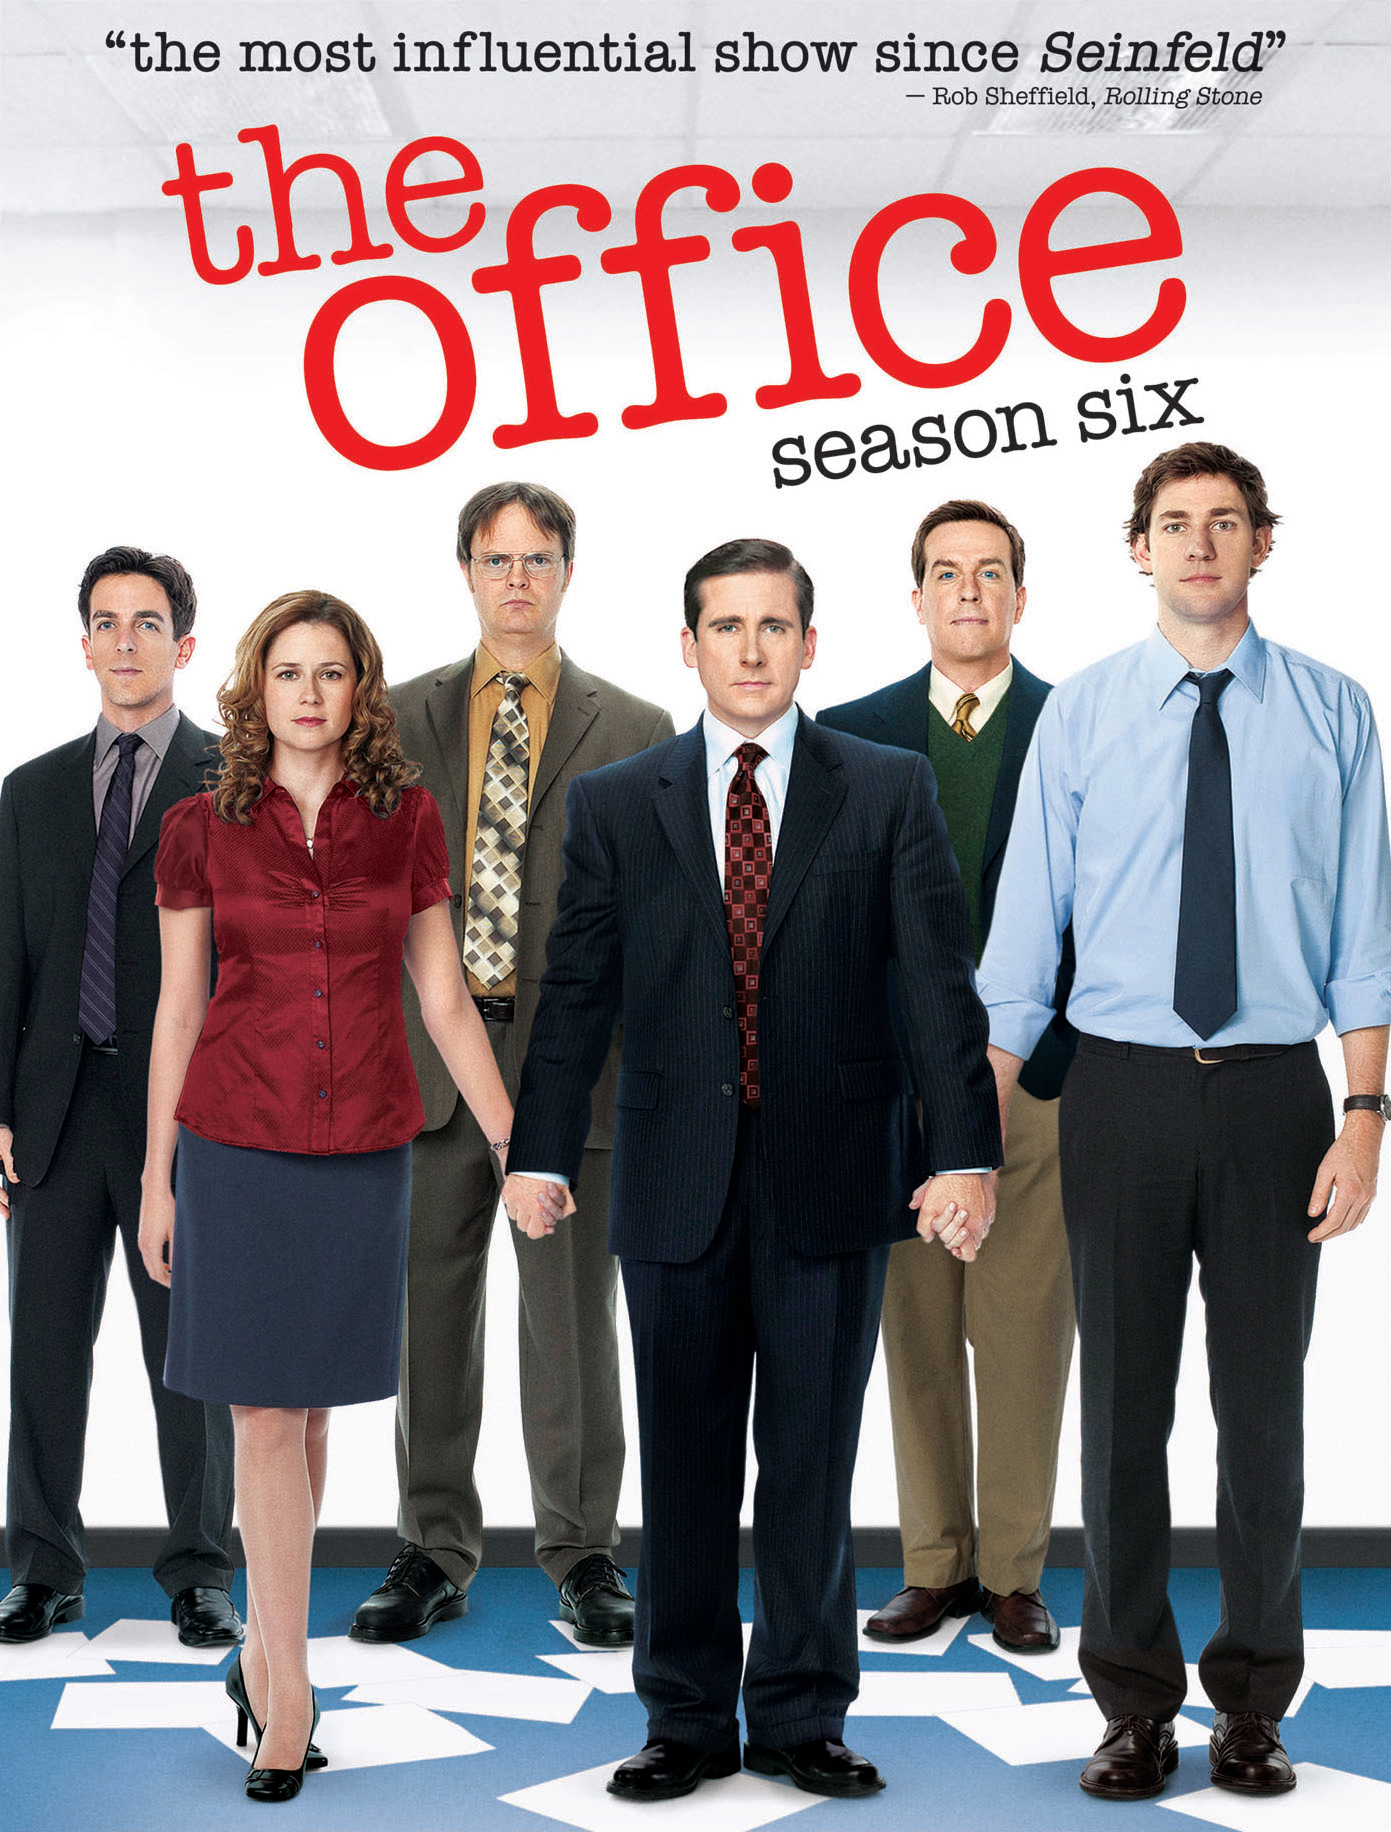 The Office - An American Workplace: Season 6 (2010) - DVD [ 2010 ]  - Comedy Television On DVD - TV Shows On GRUV